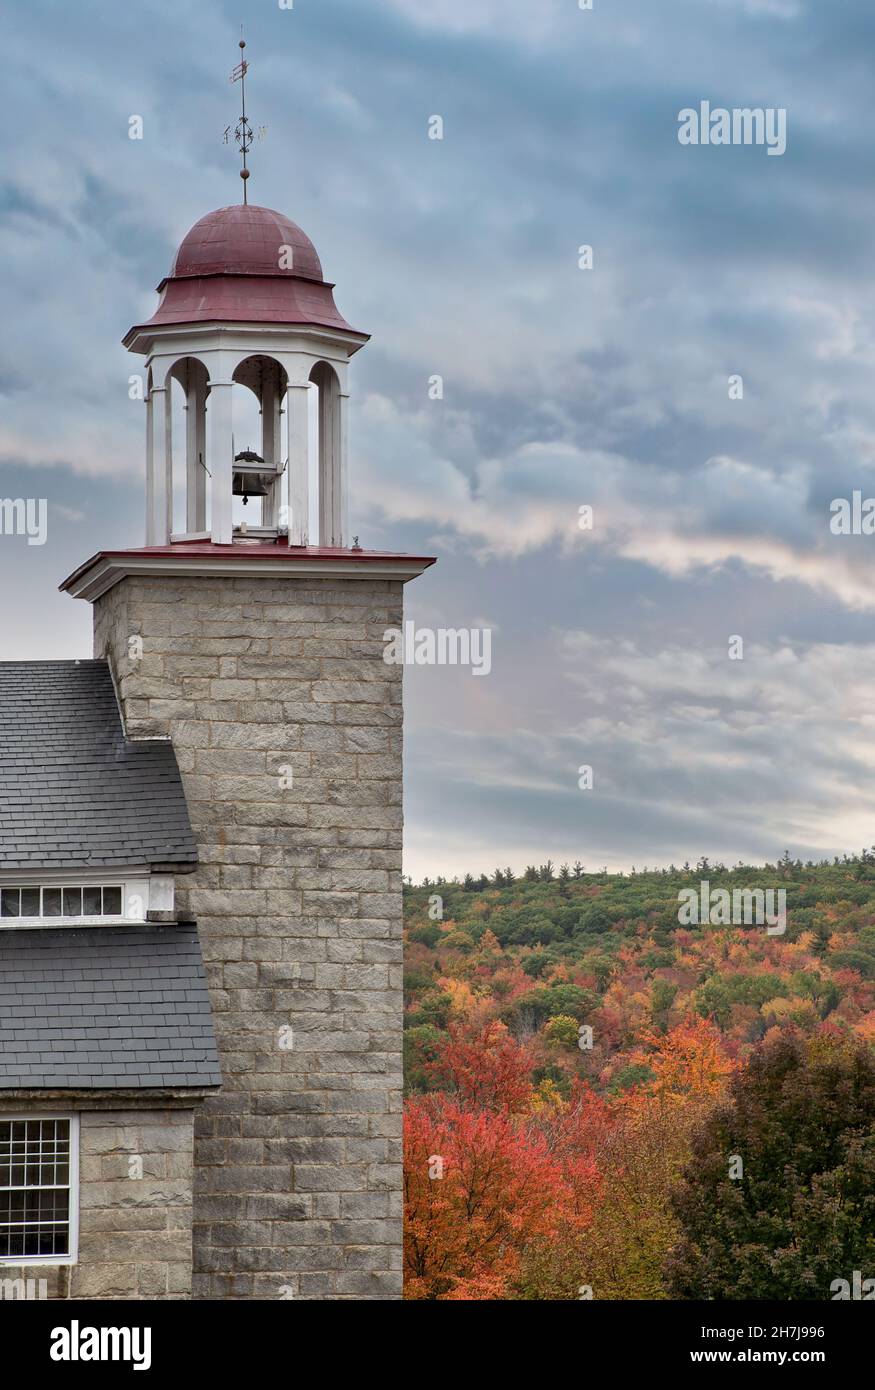 Colorful autumn sky, brilliant fall foliage, and granite bell tower of preserved textile mill building constructed in 1846 in Harrisville village. Stock Photo